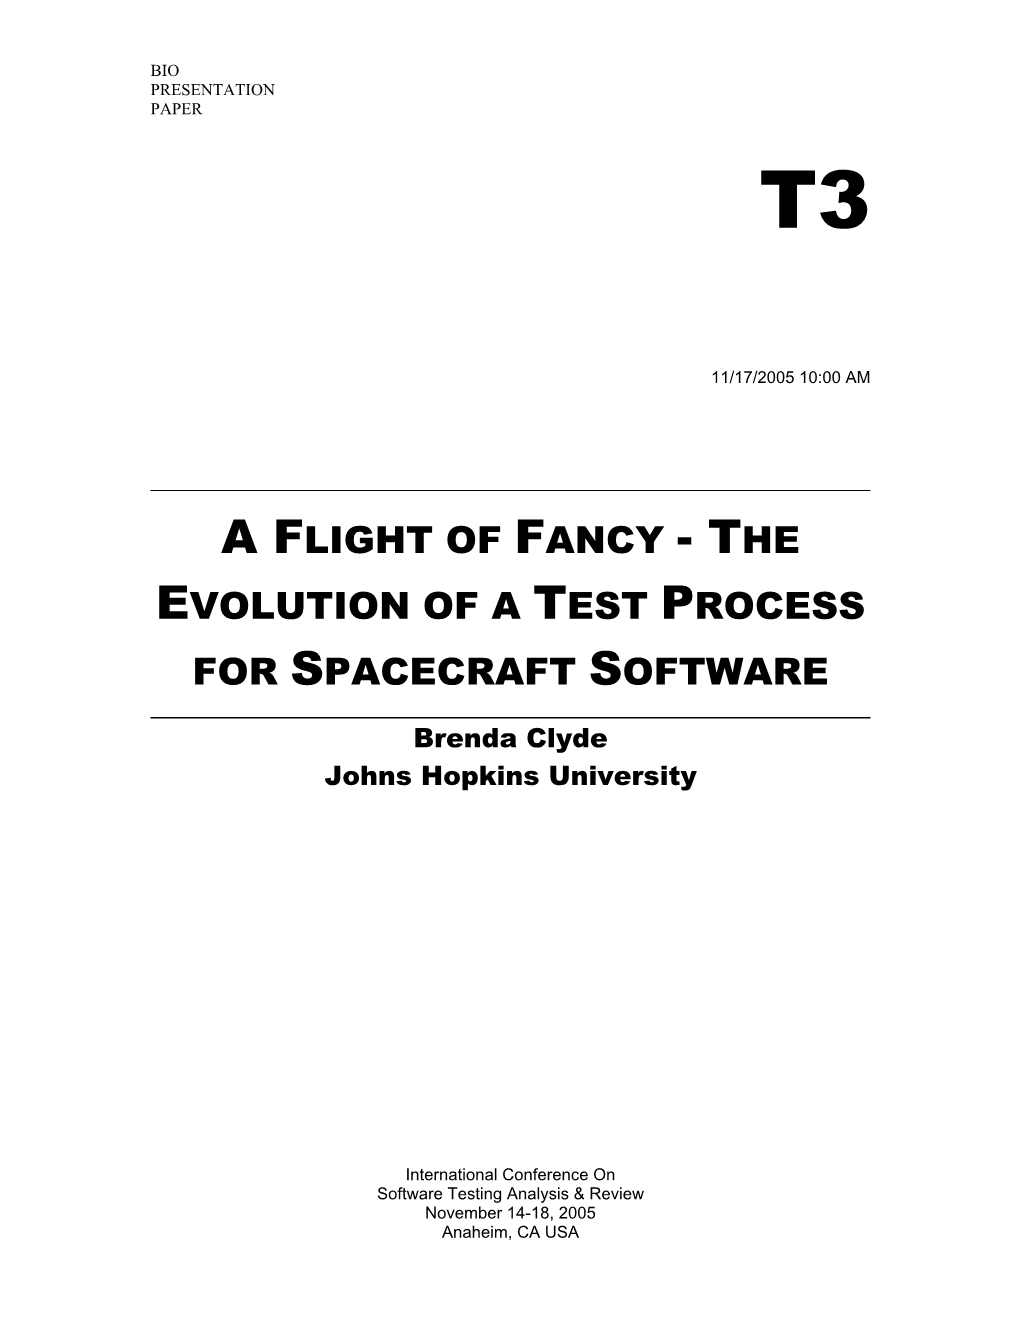 The Evolution of a Test Process for Spacecraft Software